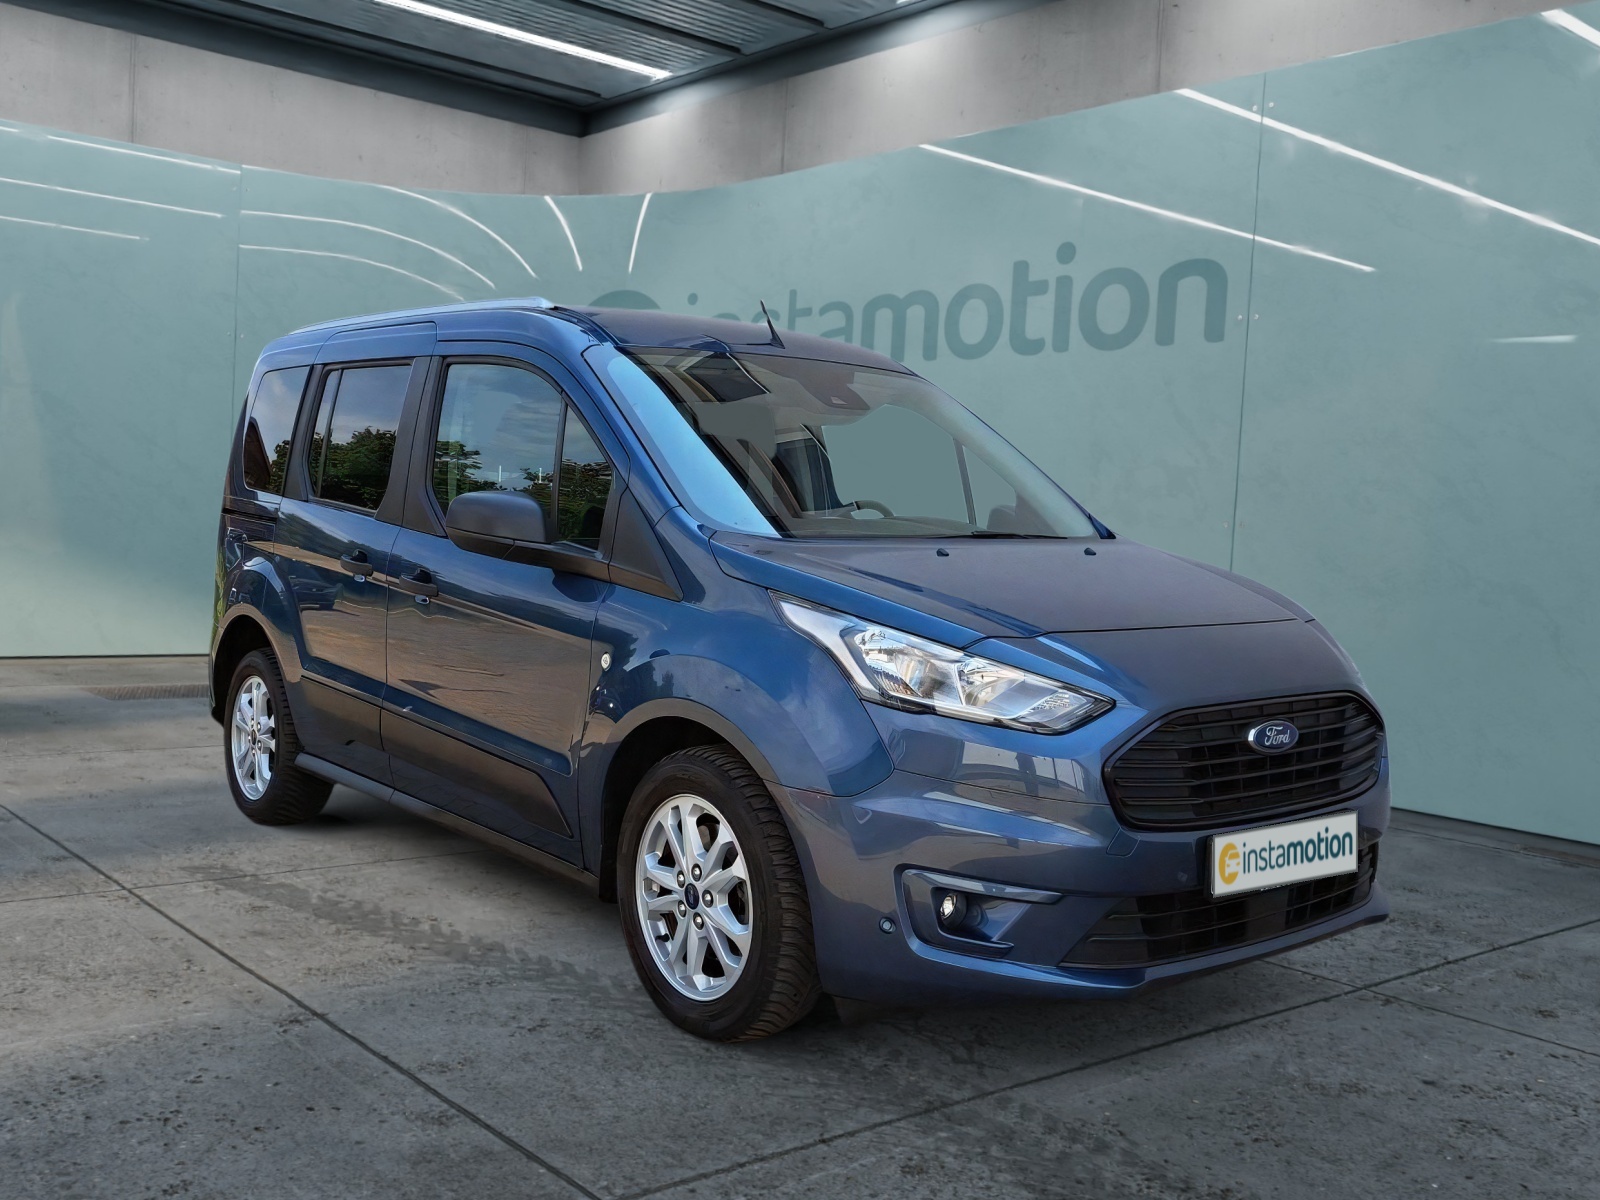 Ford Tourneo Connect 1.5 TDCi Trend